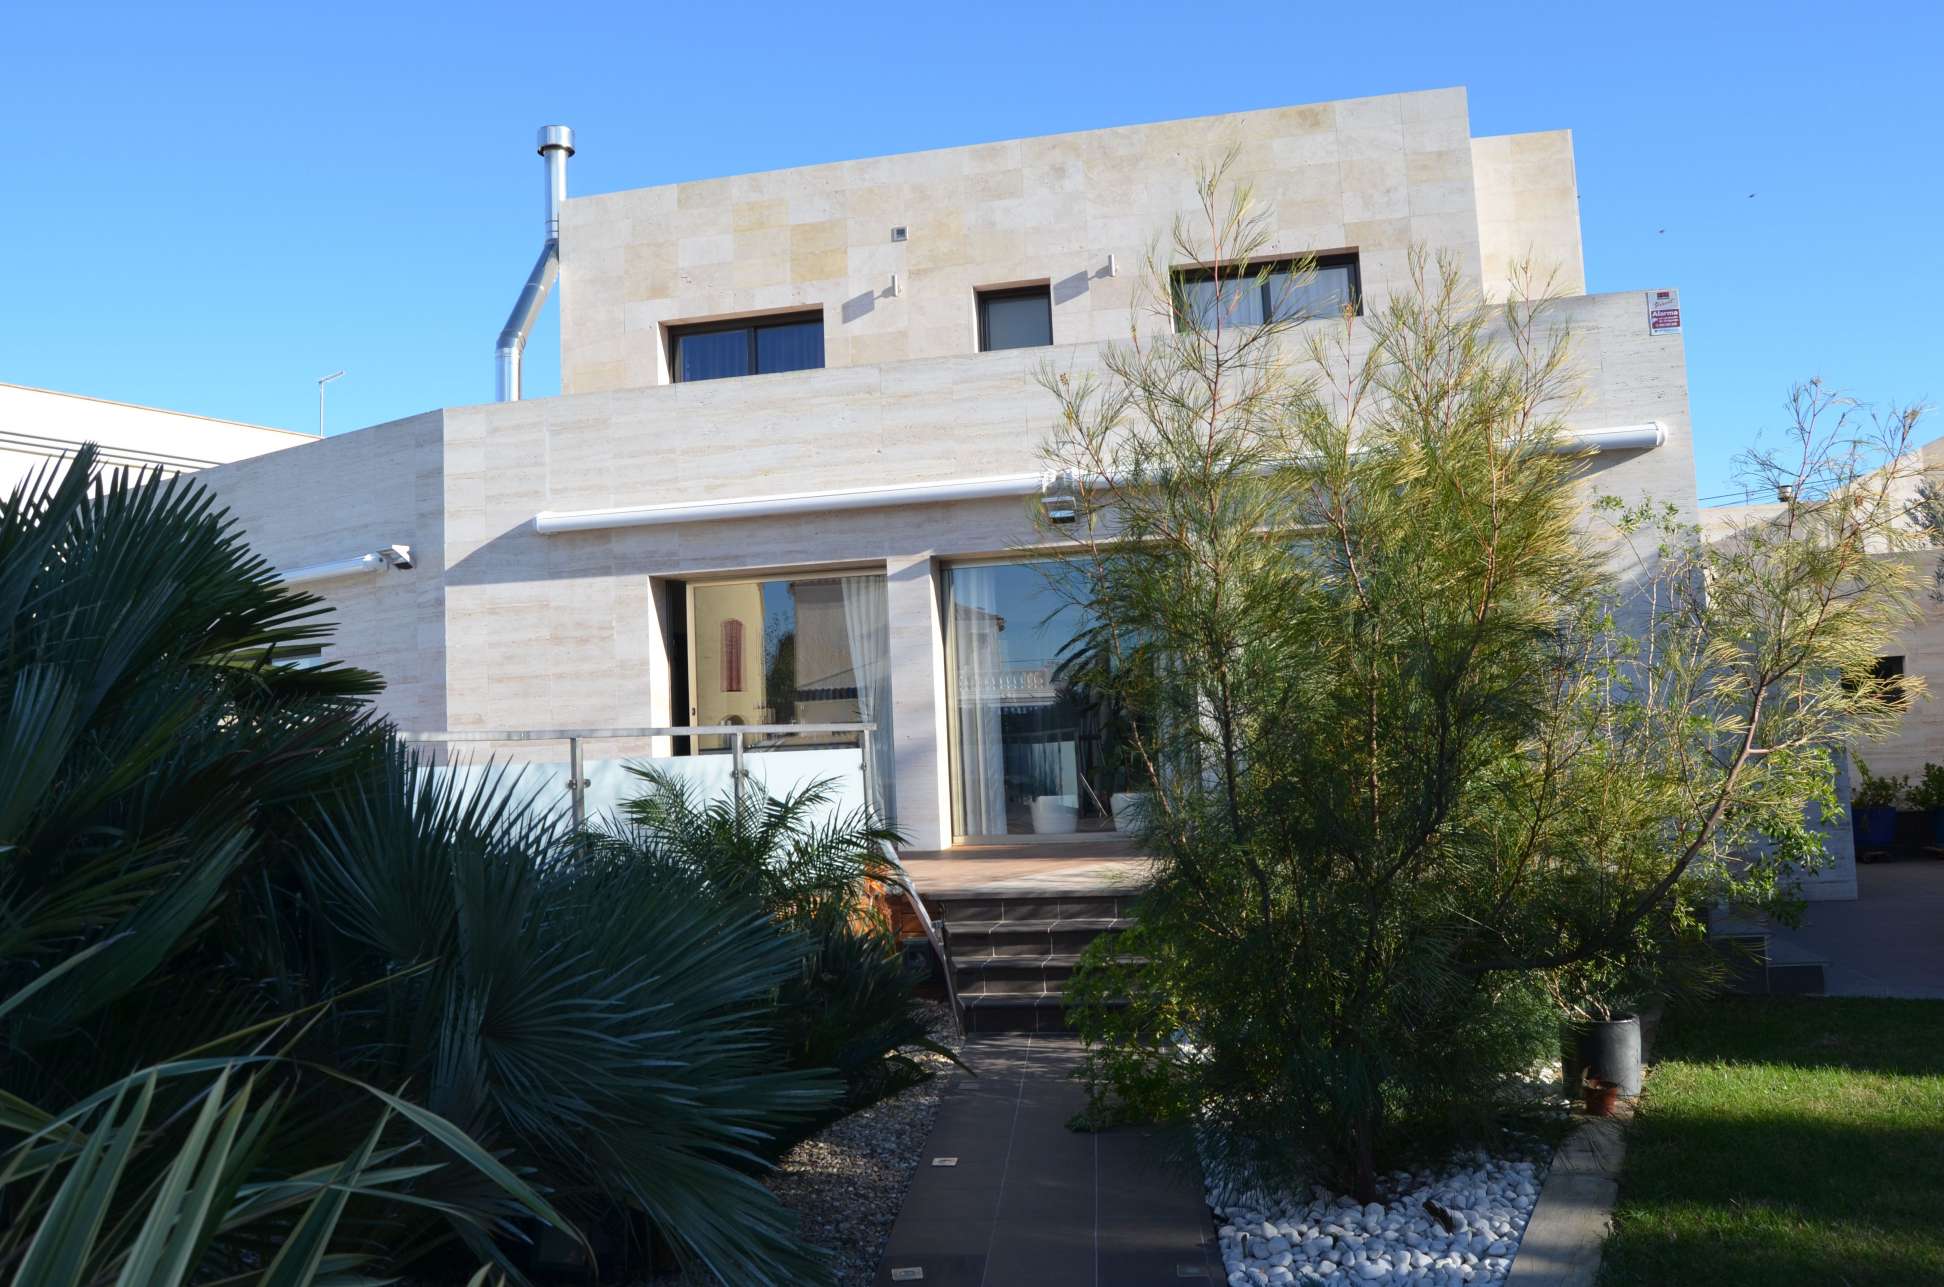 Fantastic modern villa with 25m of mooring, swimming pool and jacuzzi.